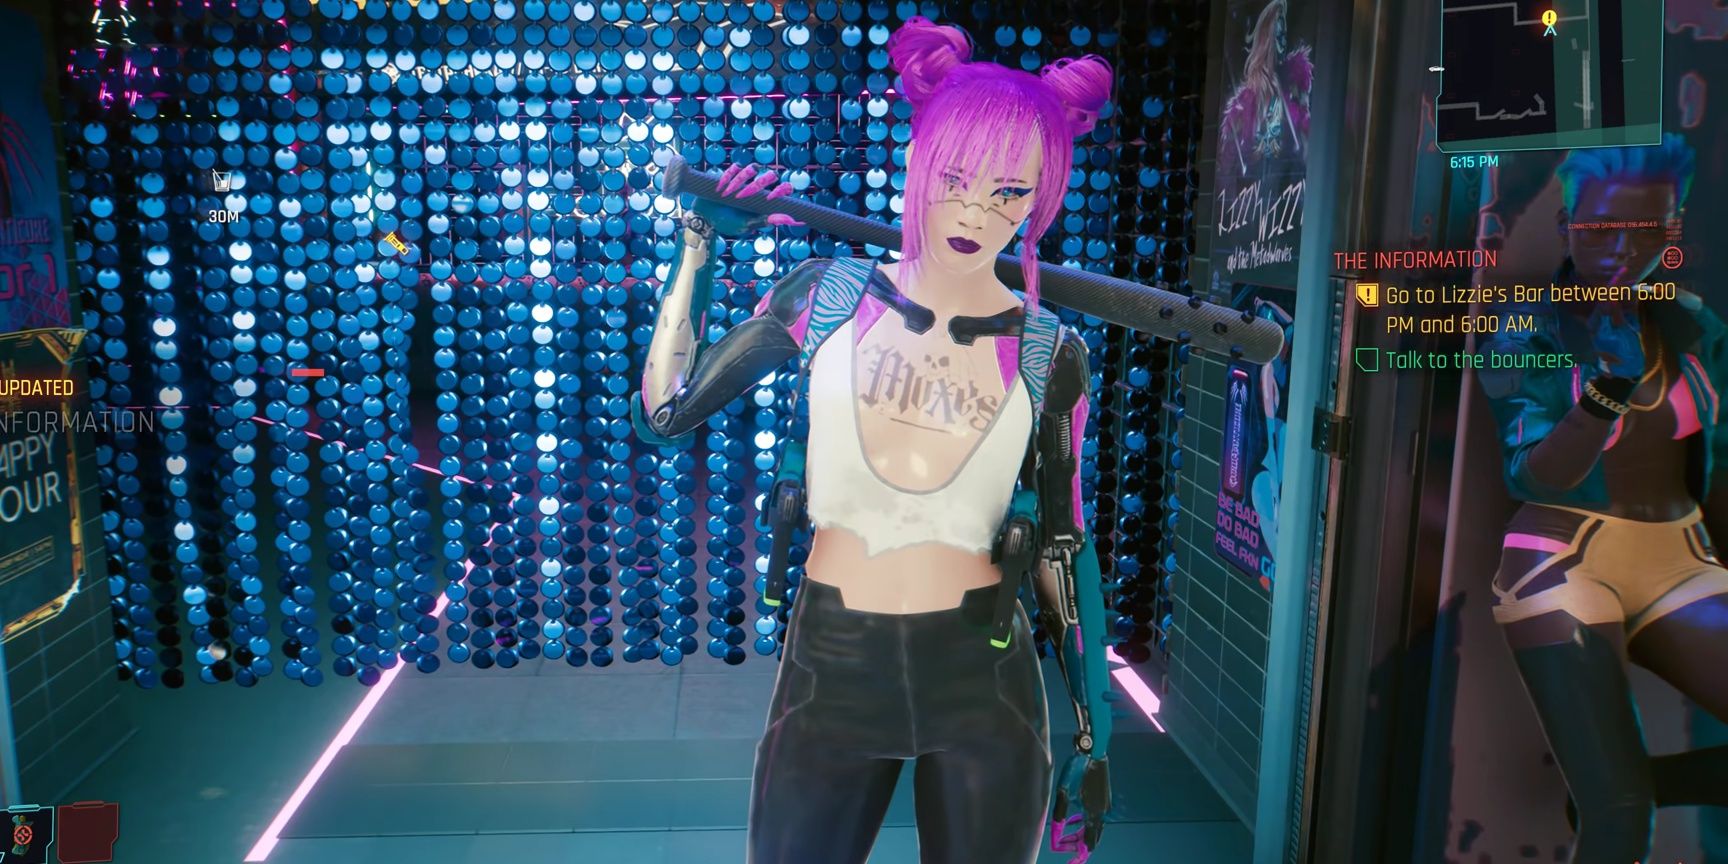 Screenshot of Rita interacting with a player before allowing entry into the club in Cyberpunk 2077.